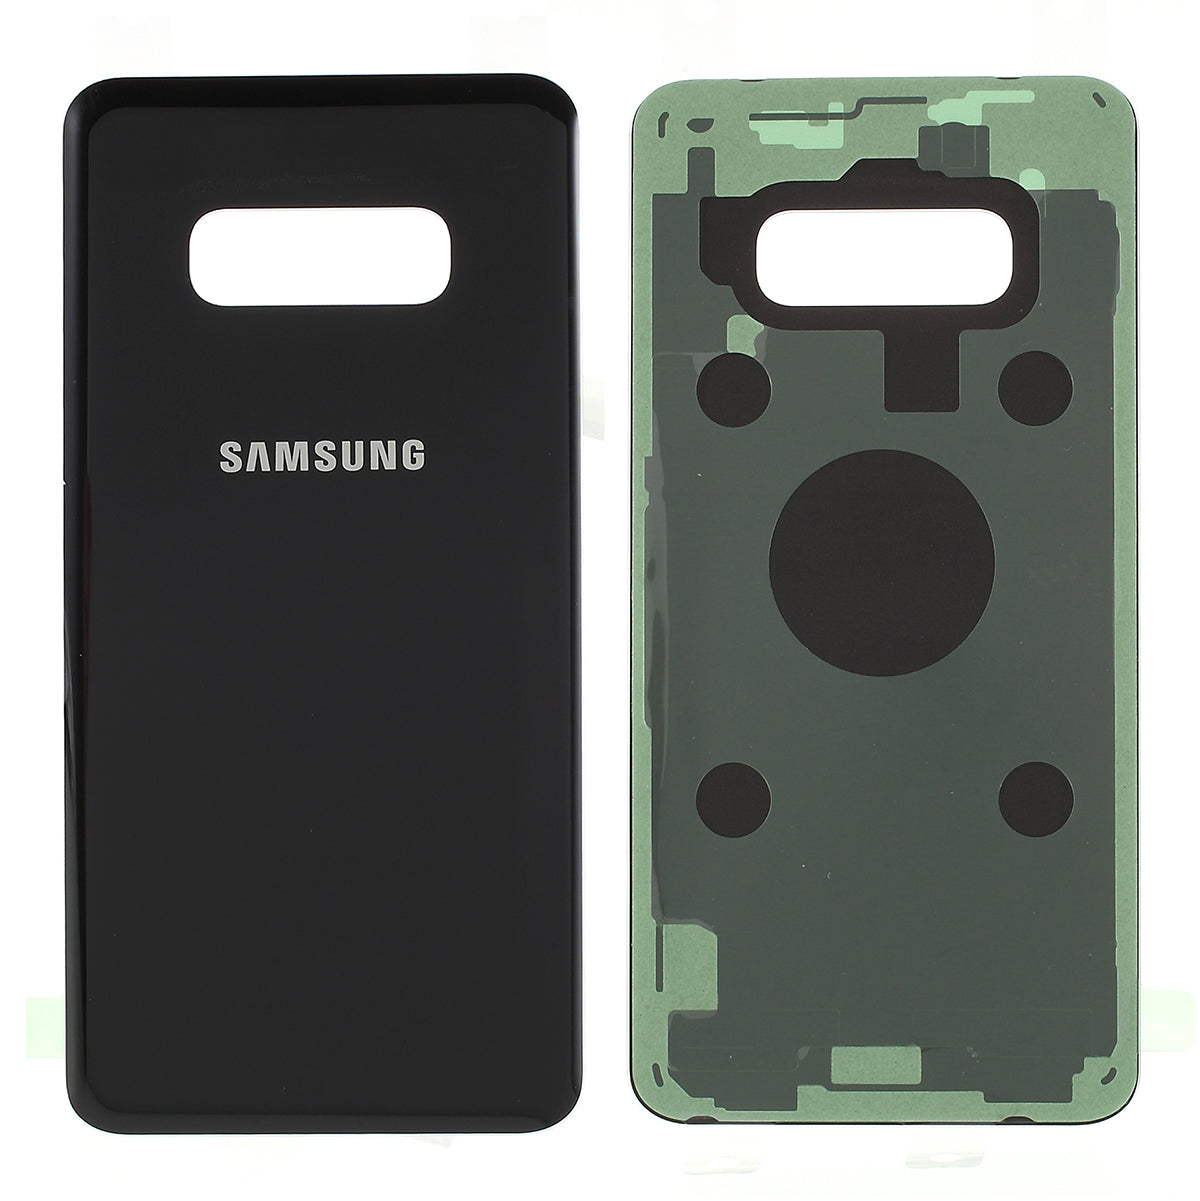 Battery Door Cover Housing with Adhesive Sticker for Samsung Galaxy S10e G970 - Black